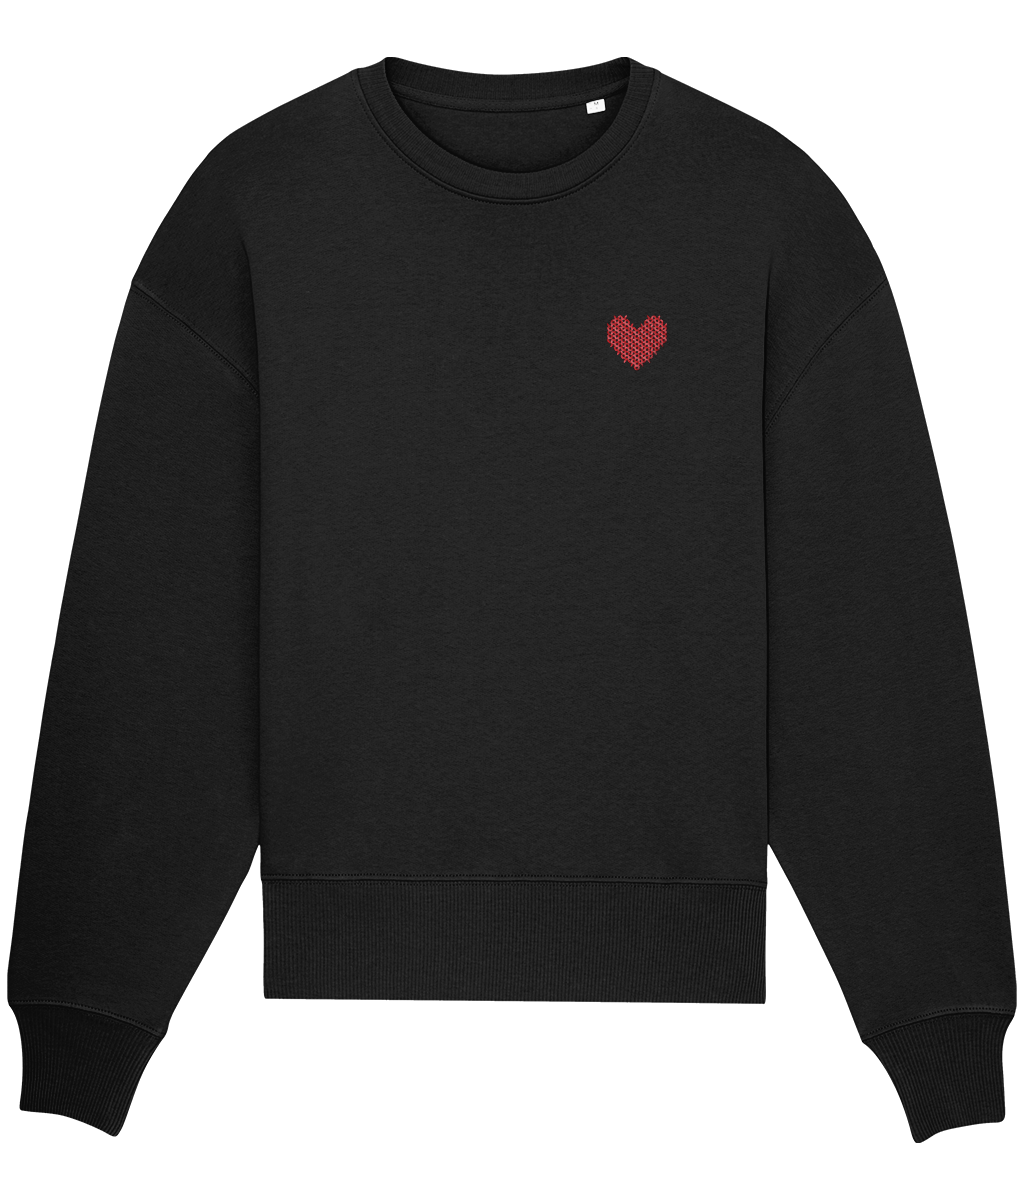 Made With Love Embroidered Red Heart Sweatshirt